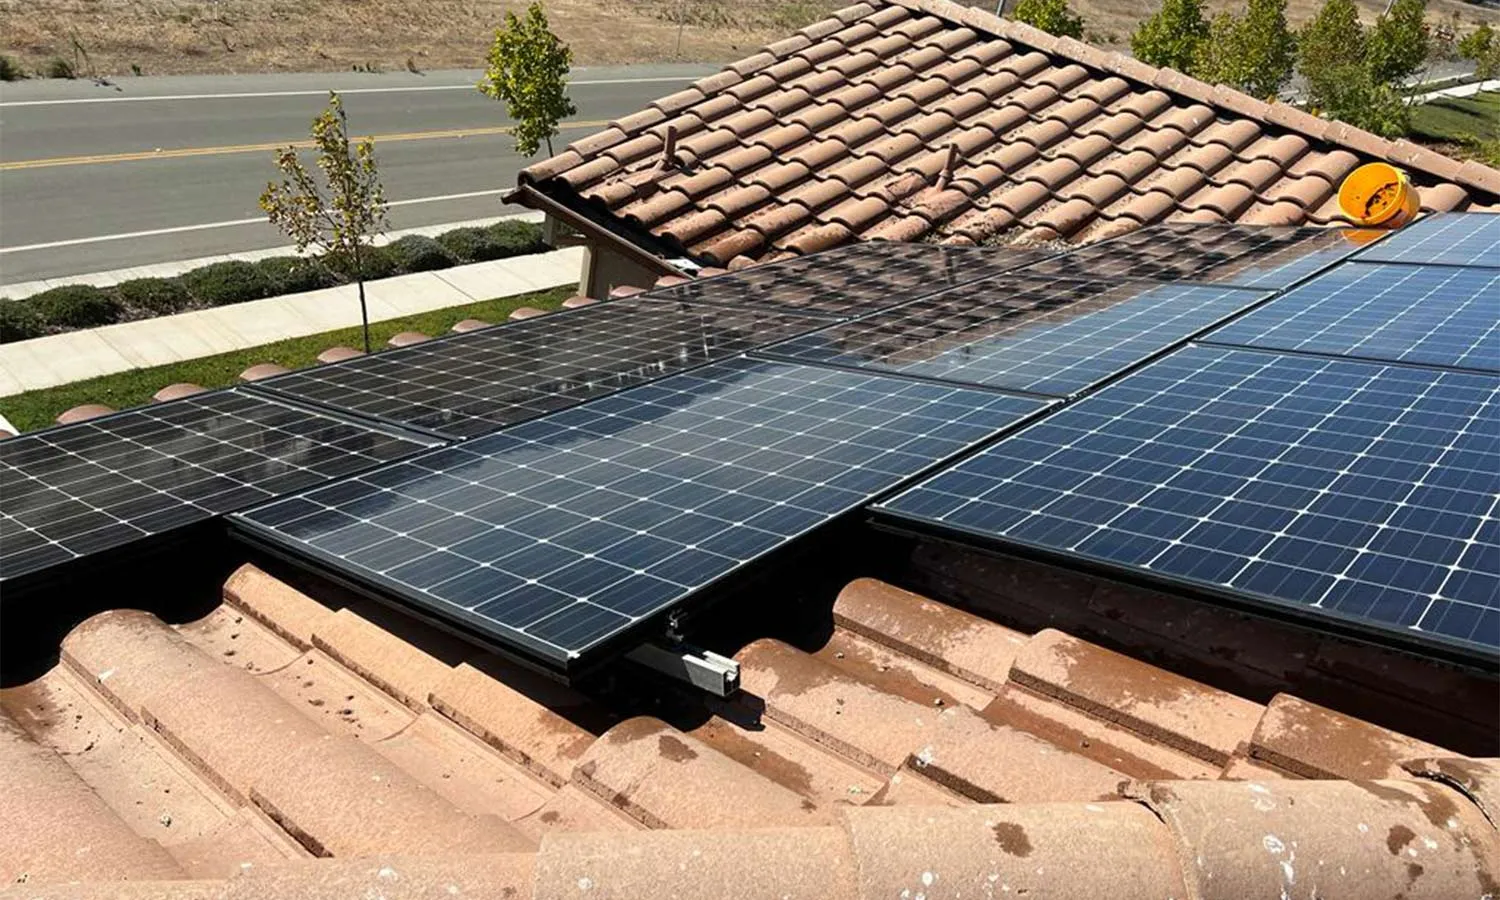 Sparkling clean solar panels in Gilroy, California, after professional cleaning